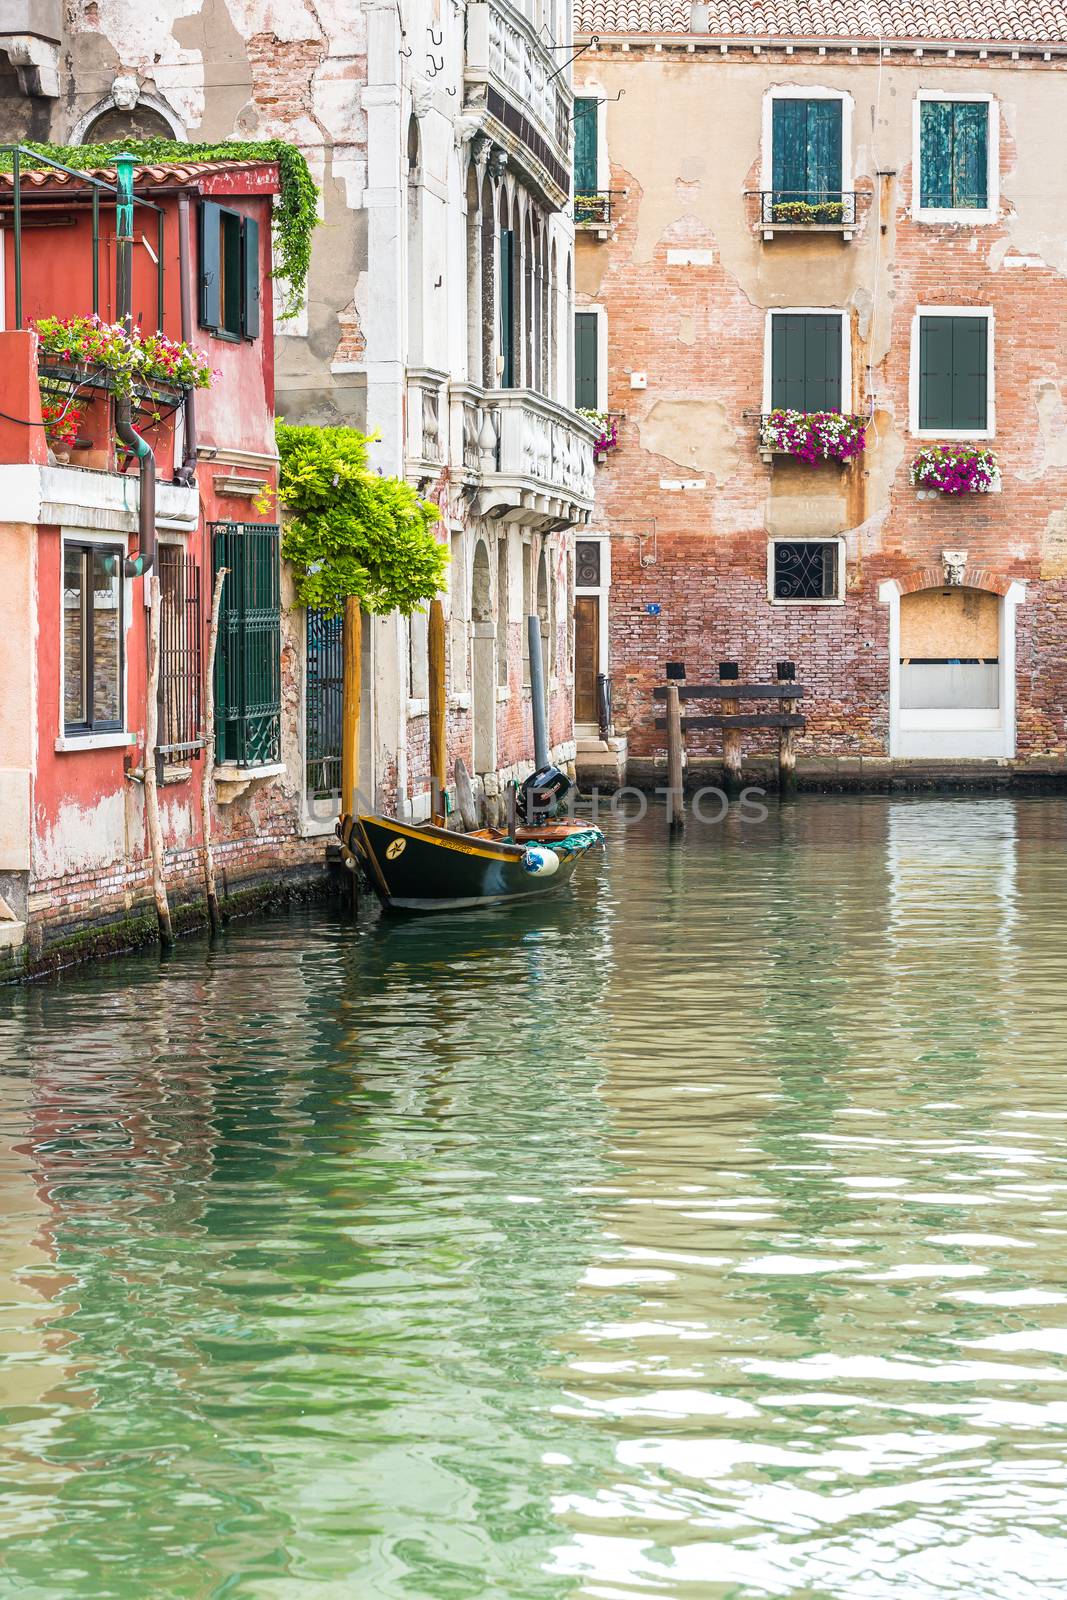 The charming city of Venice in Italy.